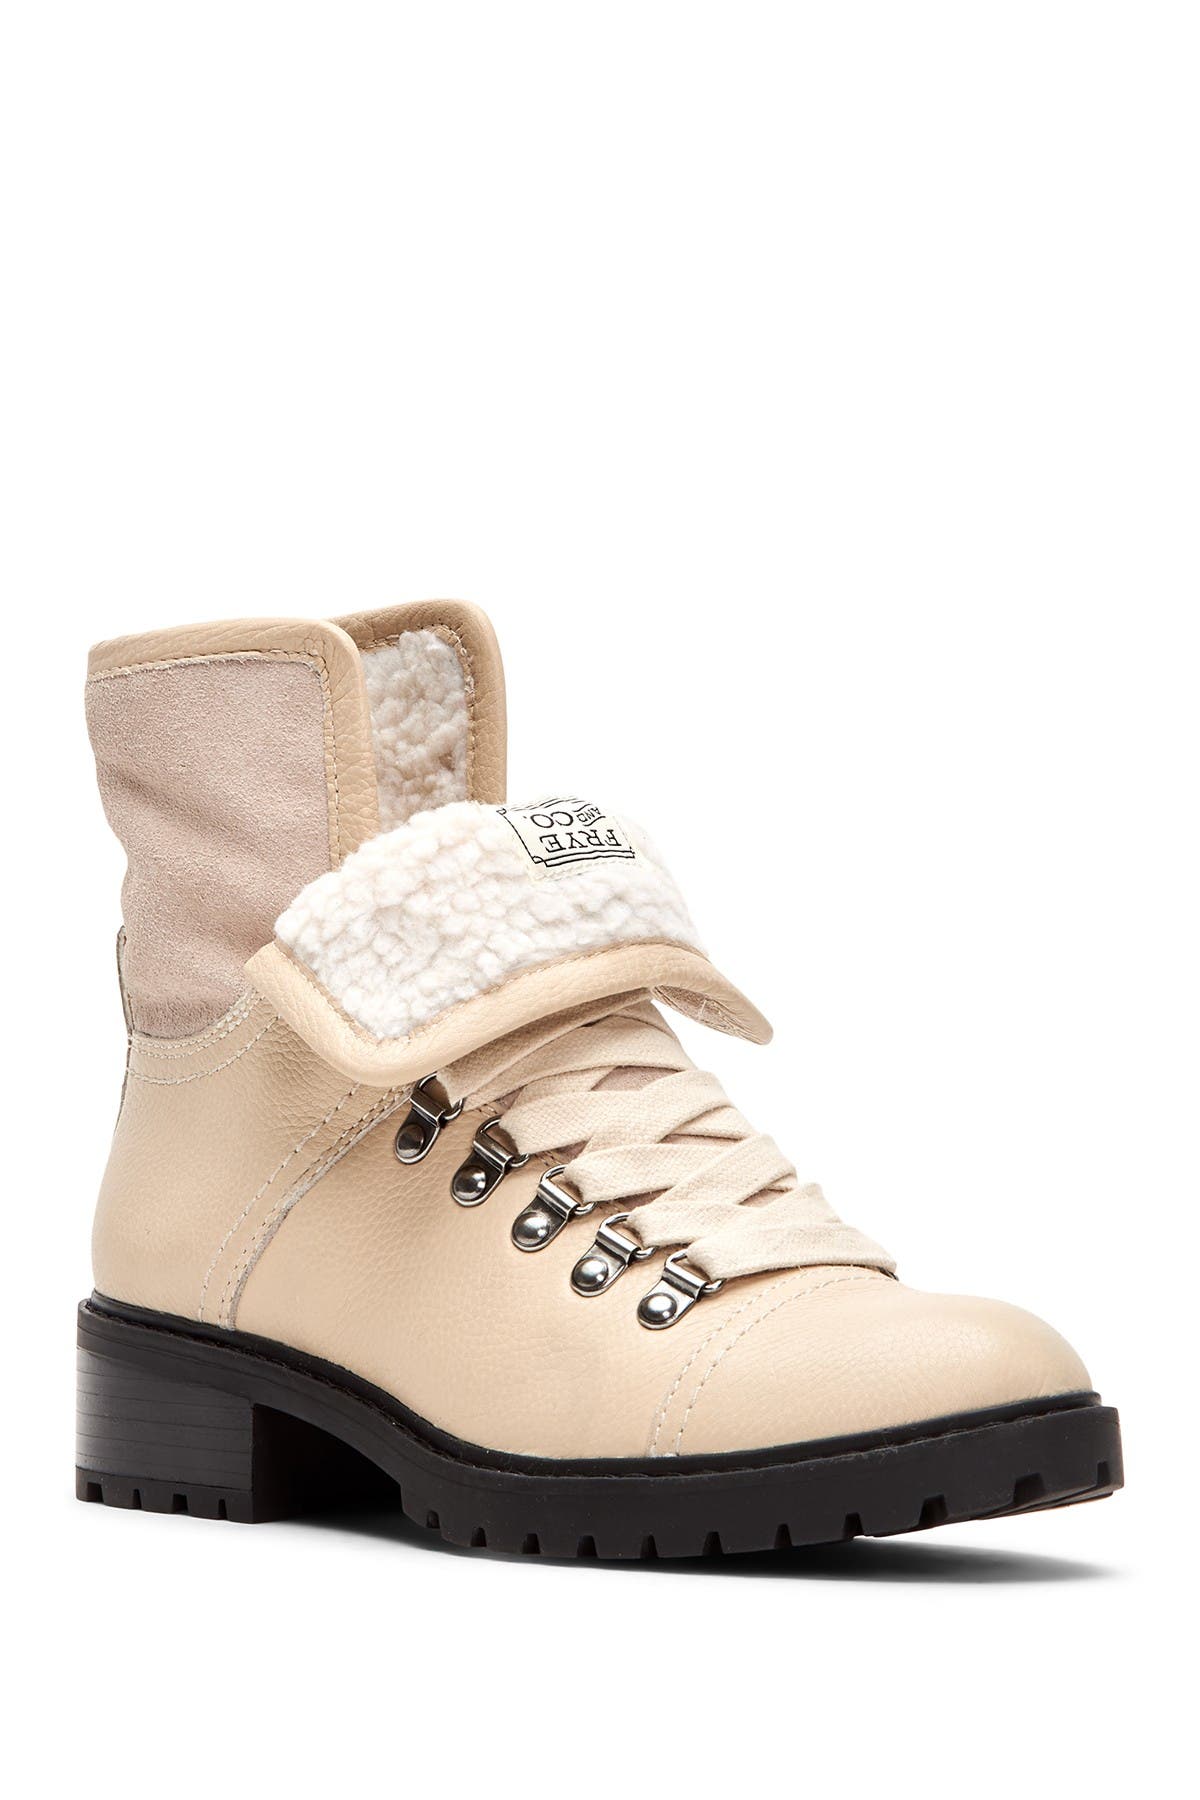 Anise Faux Shearling Lined Hiker Boot 